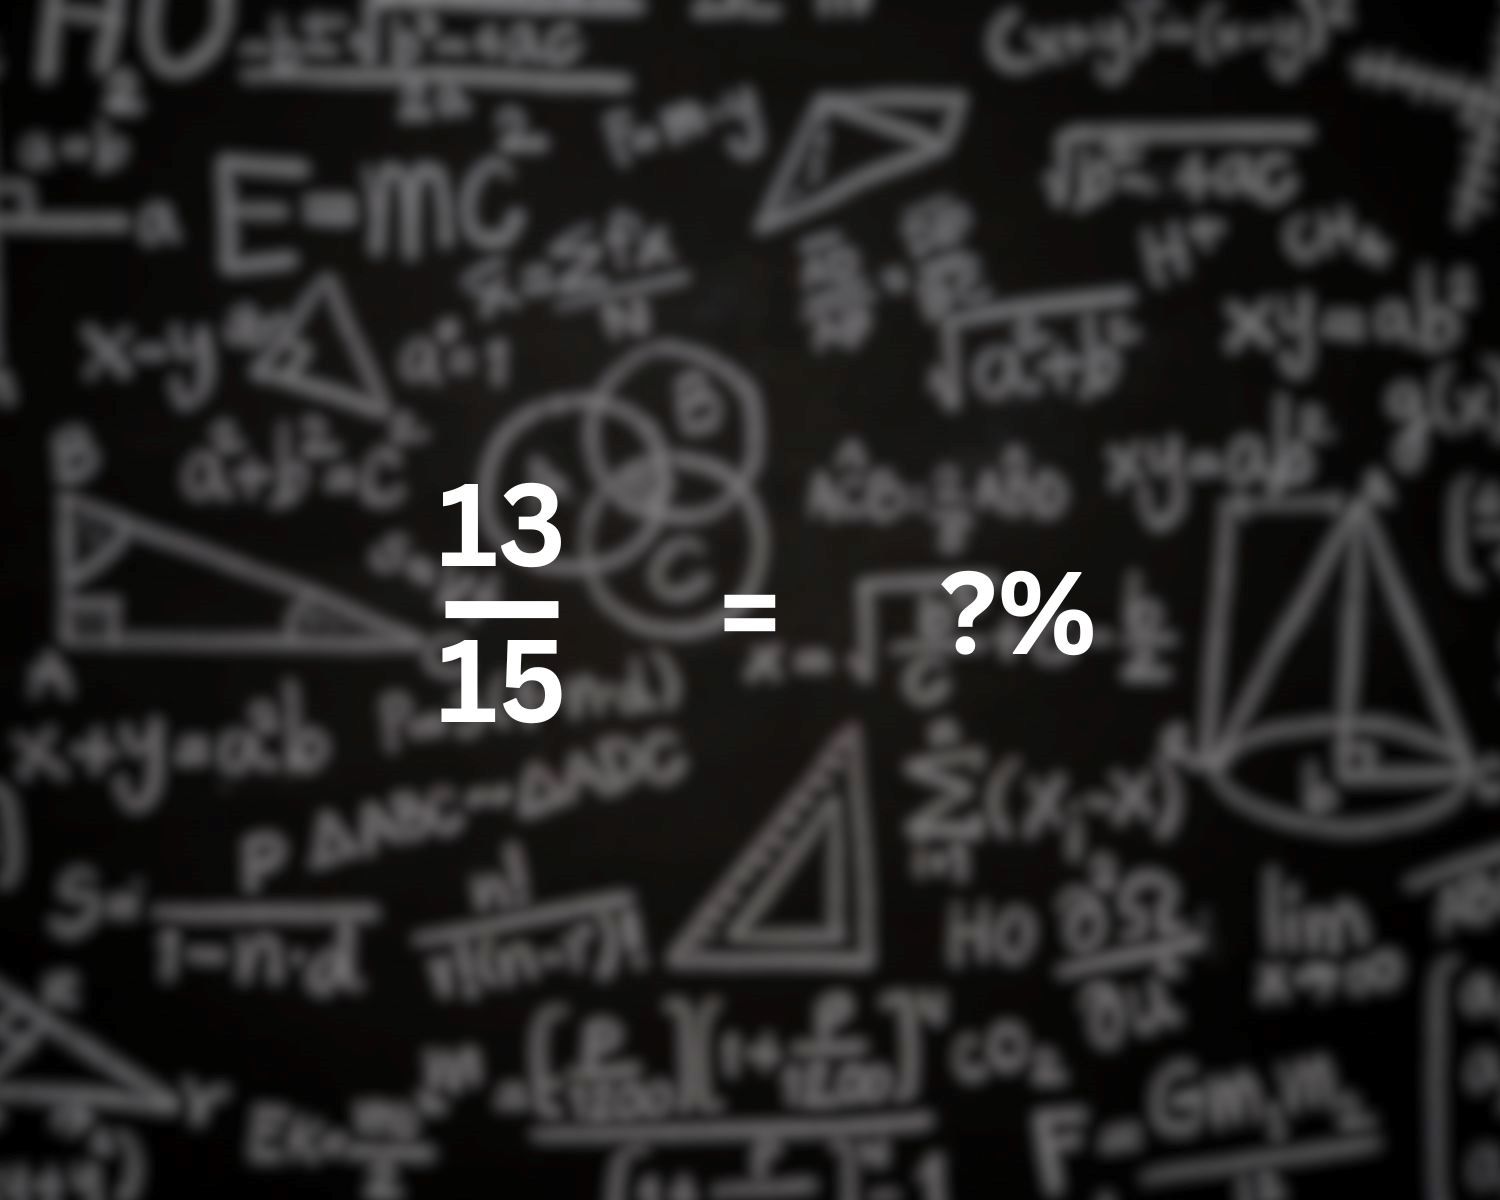 The Simple Trick To Convert 13/15 To A Percentage In Seconds!